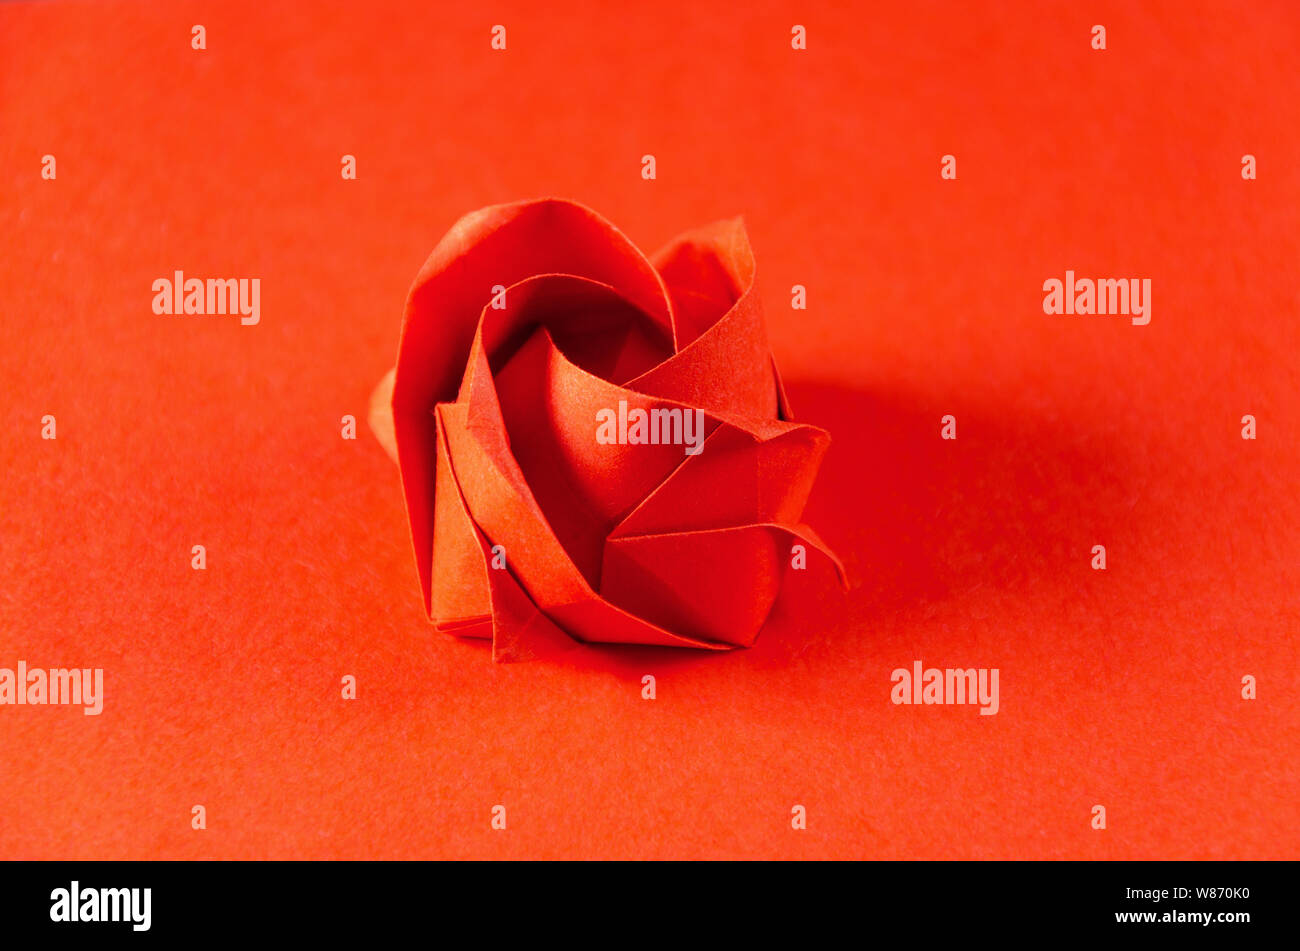 Red origami rose on red background. Japanese art of paper folding. Flat  square sheet of paper transferred into a finished sculpture through folding  Stock Photo - Alamy